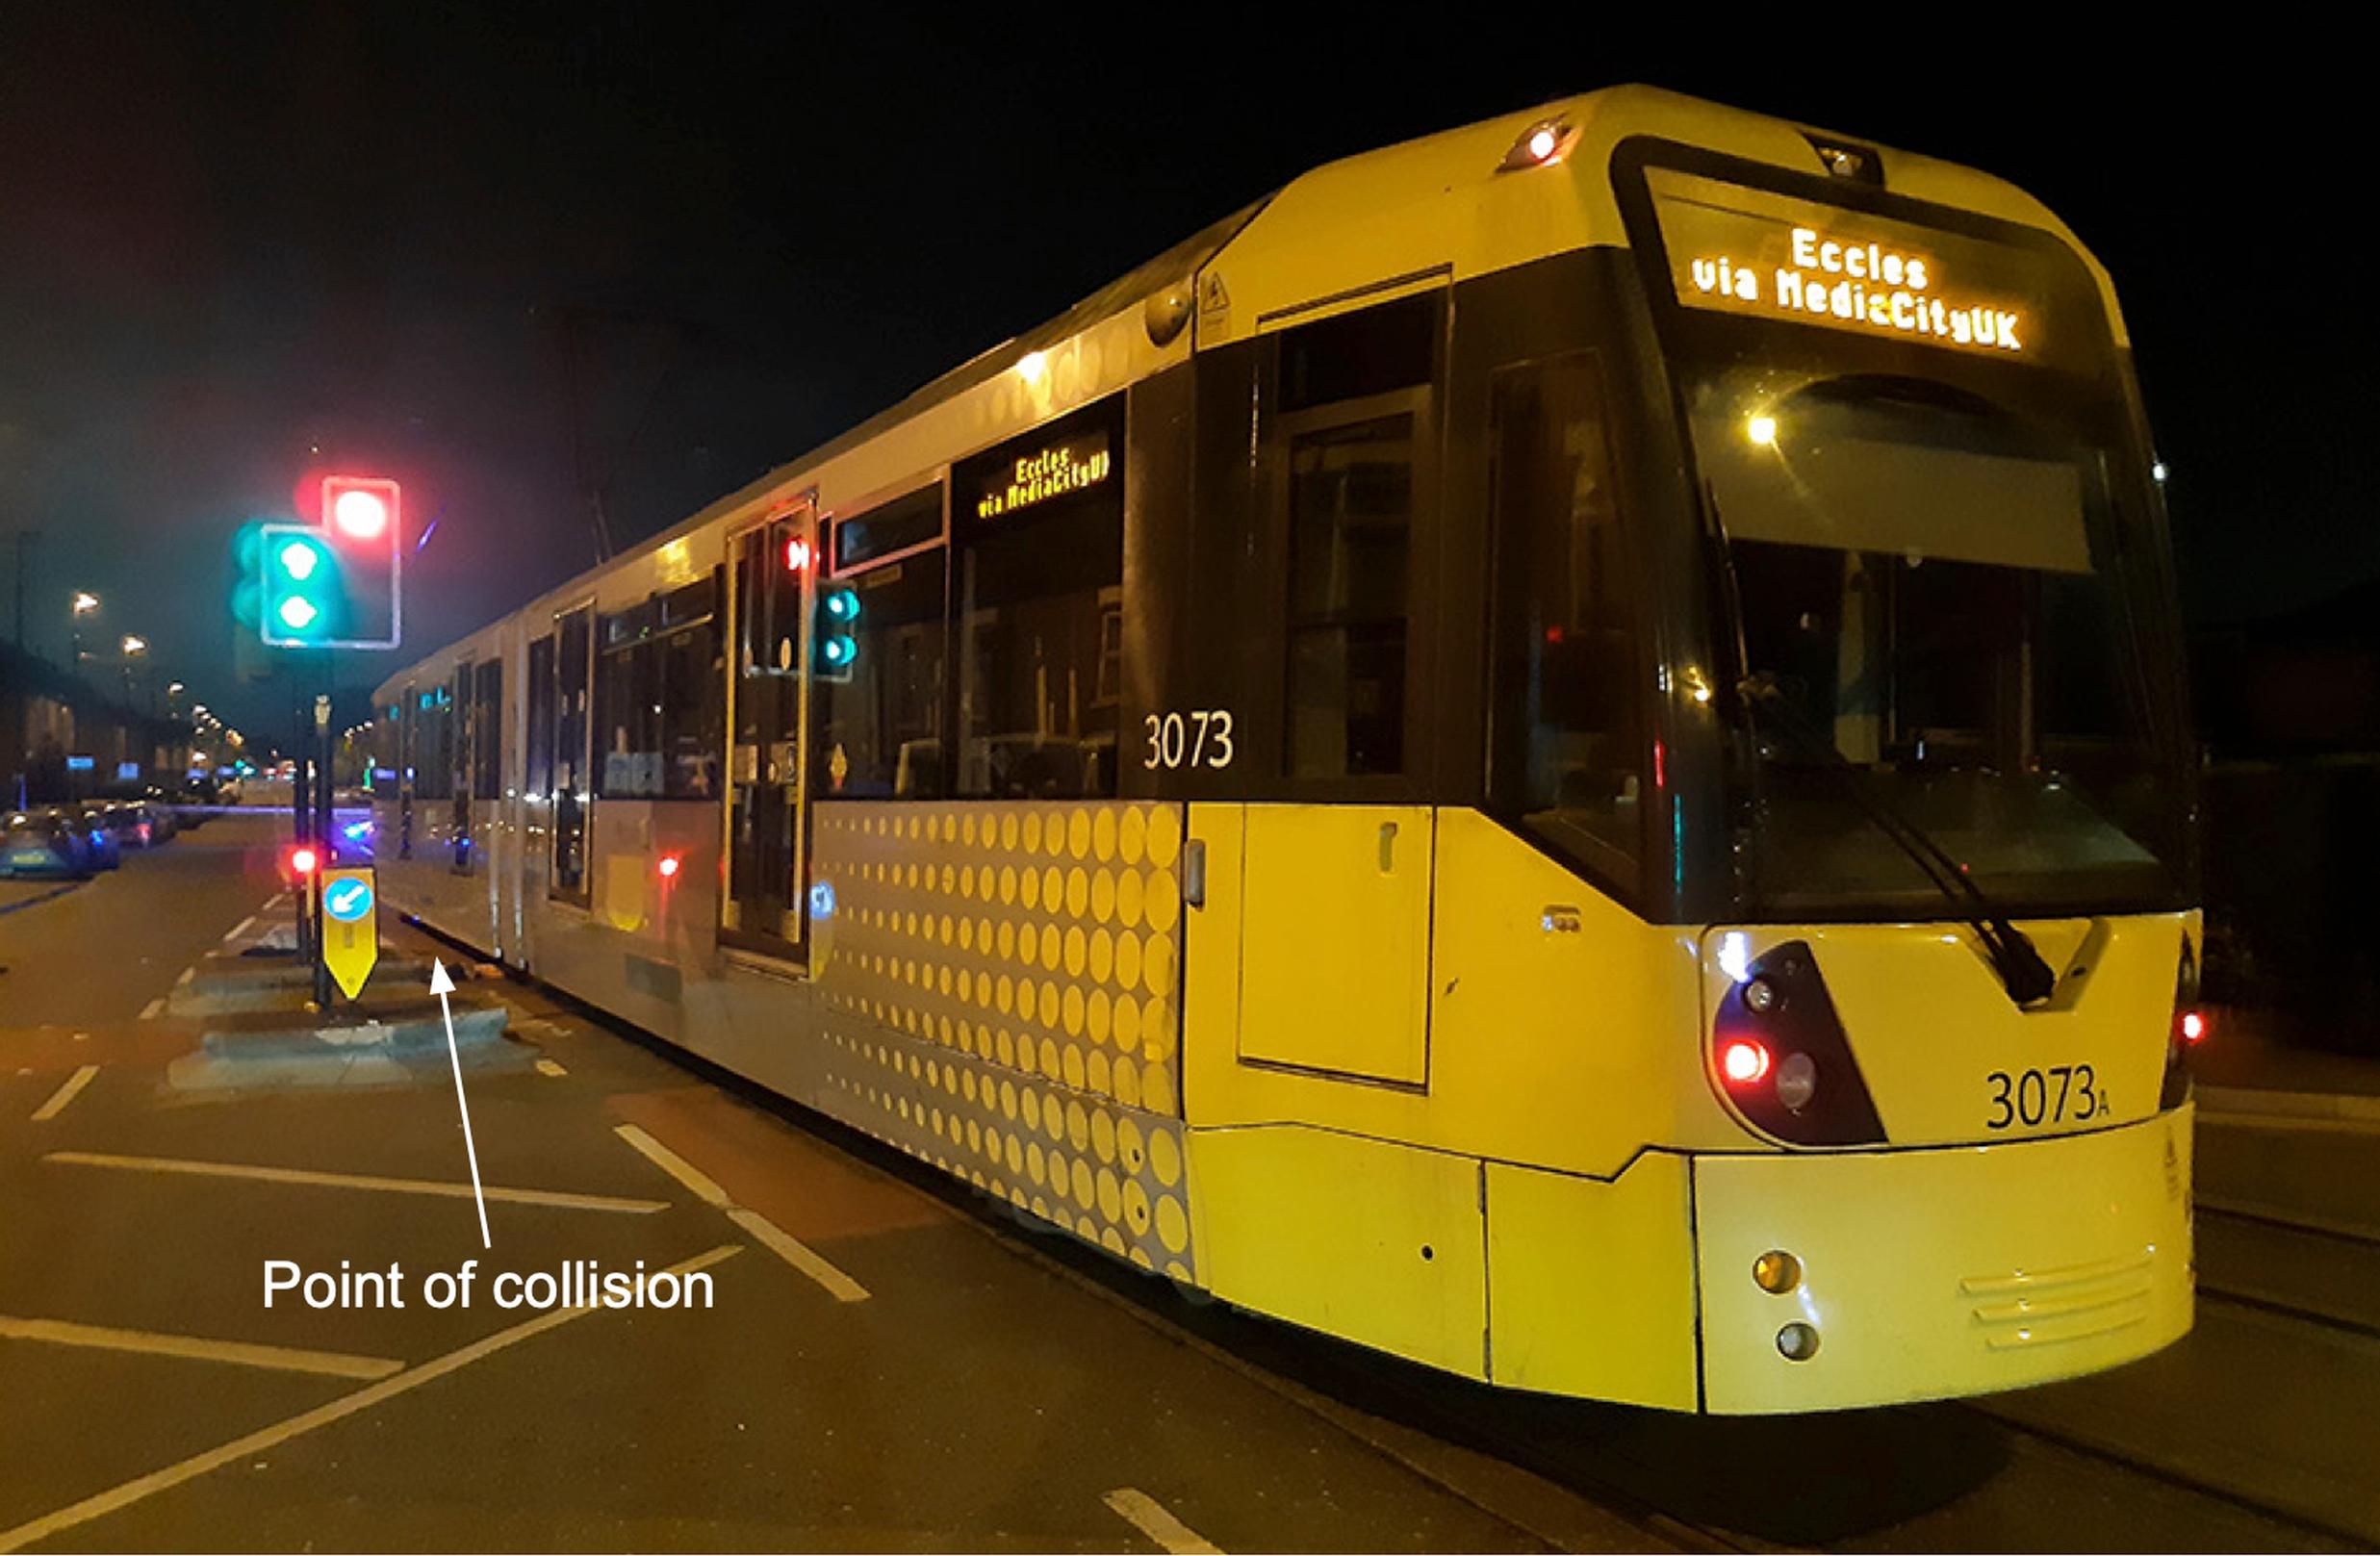 The tram stopped after the collision with the child cyclist in Manchester on 1 September 2021. The point of the collision is indicated